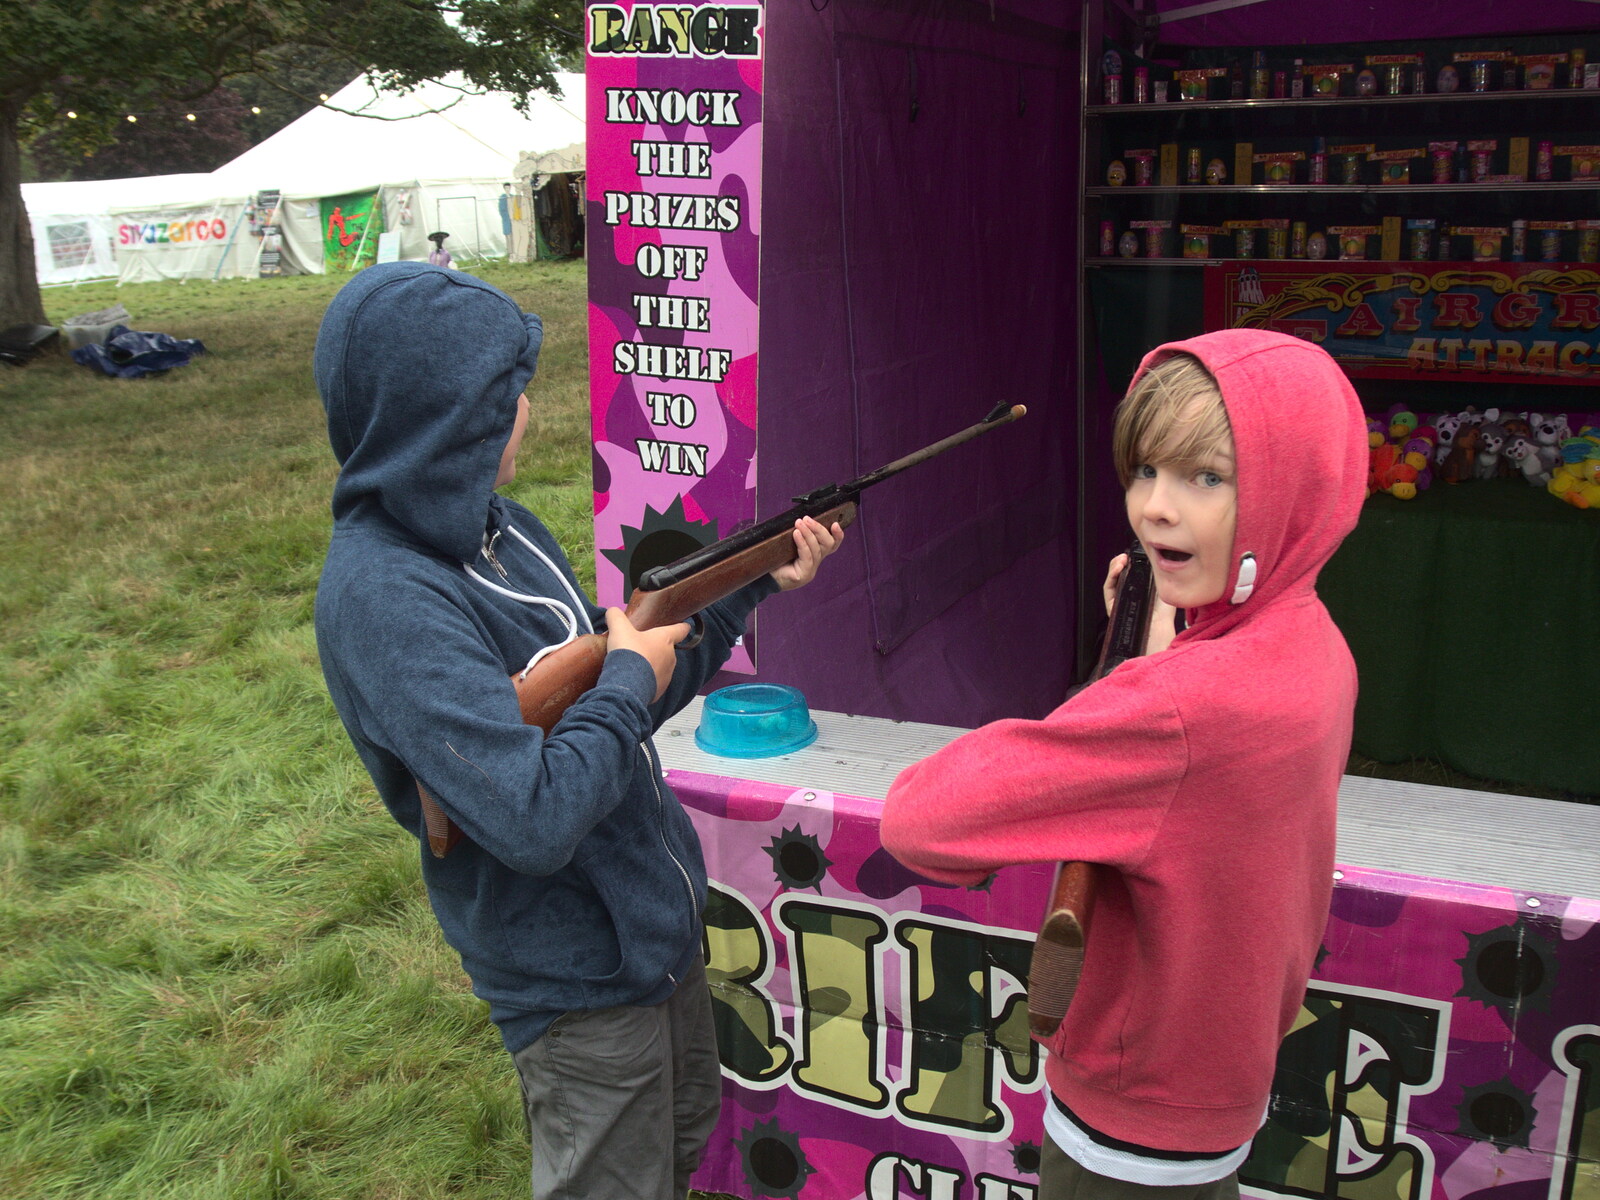 Fred and Harry are on the rifle range from Maui Waui Festival, Hill Farm, Gressenhall, Norfolk - 28th August 2021